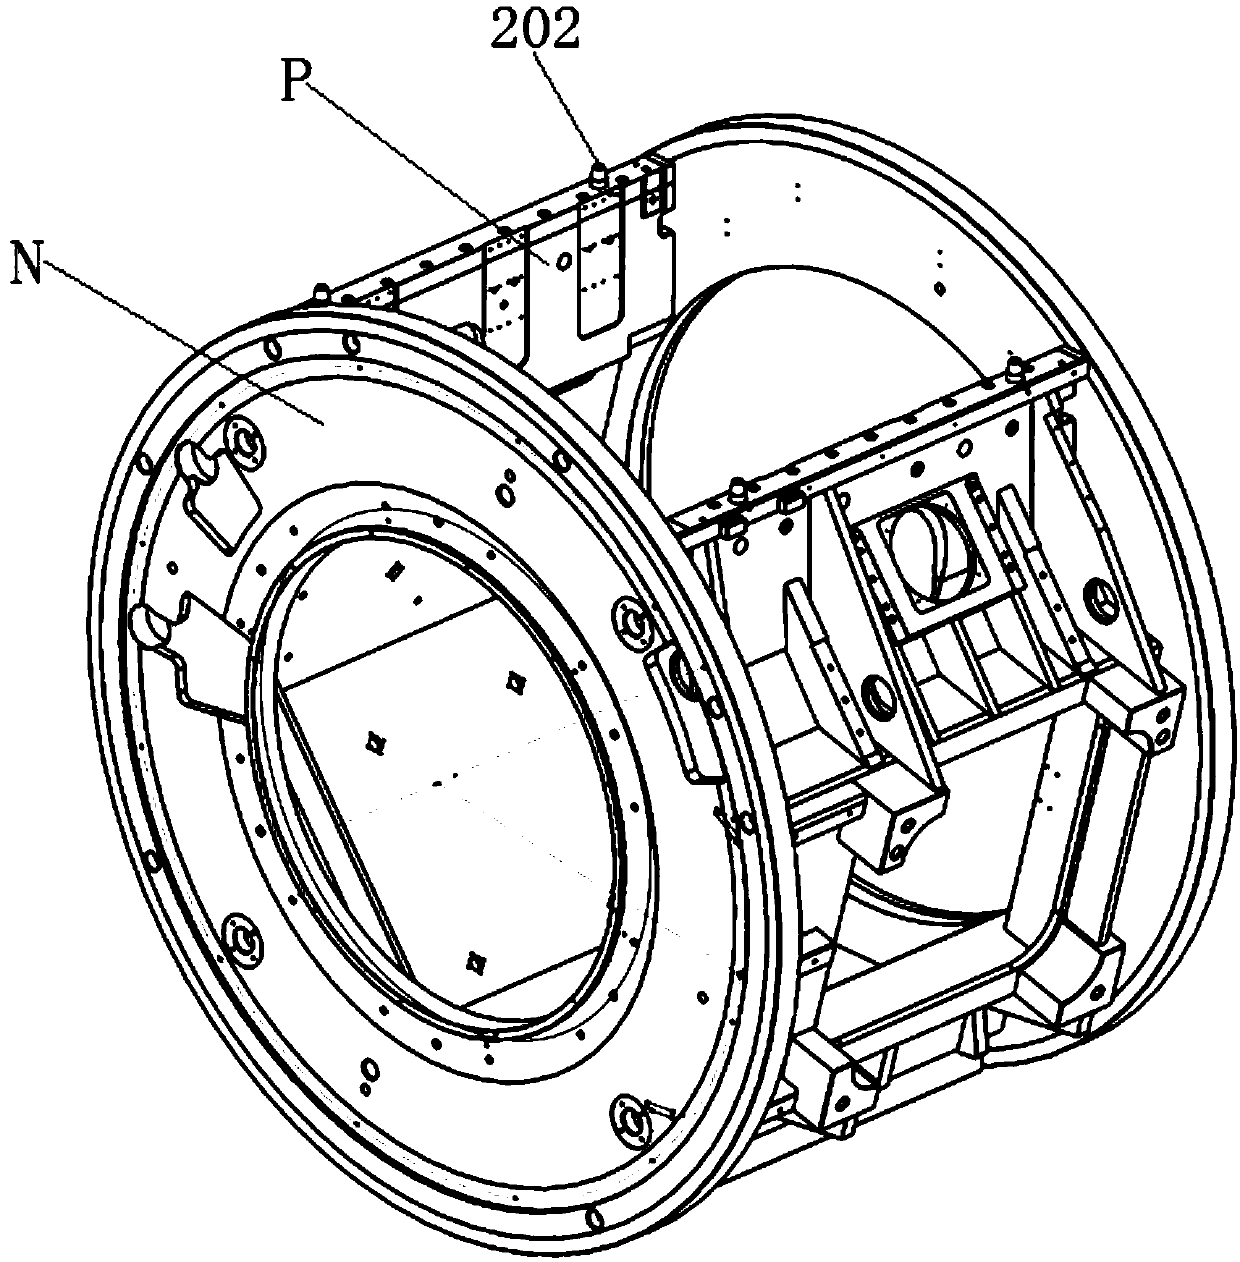 Mounting mechanism and radiotherapy equipment